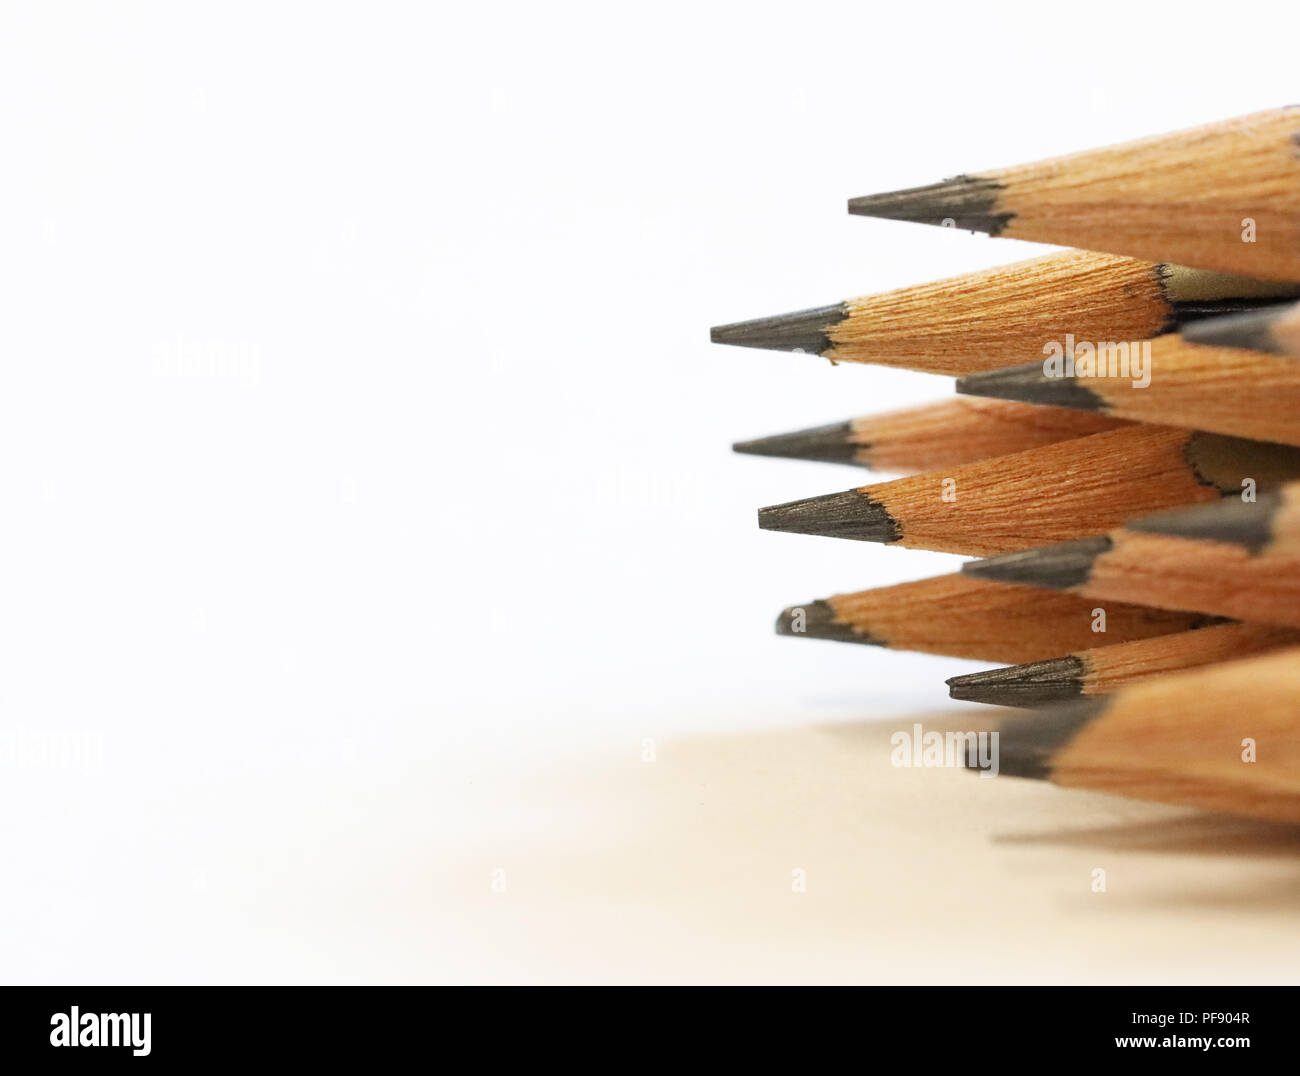 Arrangement of close up sharpened drawing writing graphite pencils. Imagine draw write think create concept or idea. Stock Photo